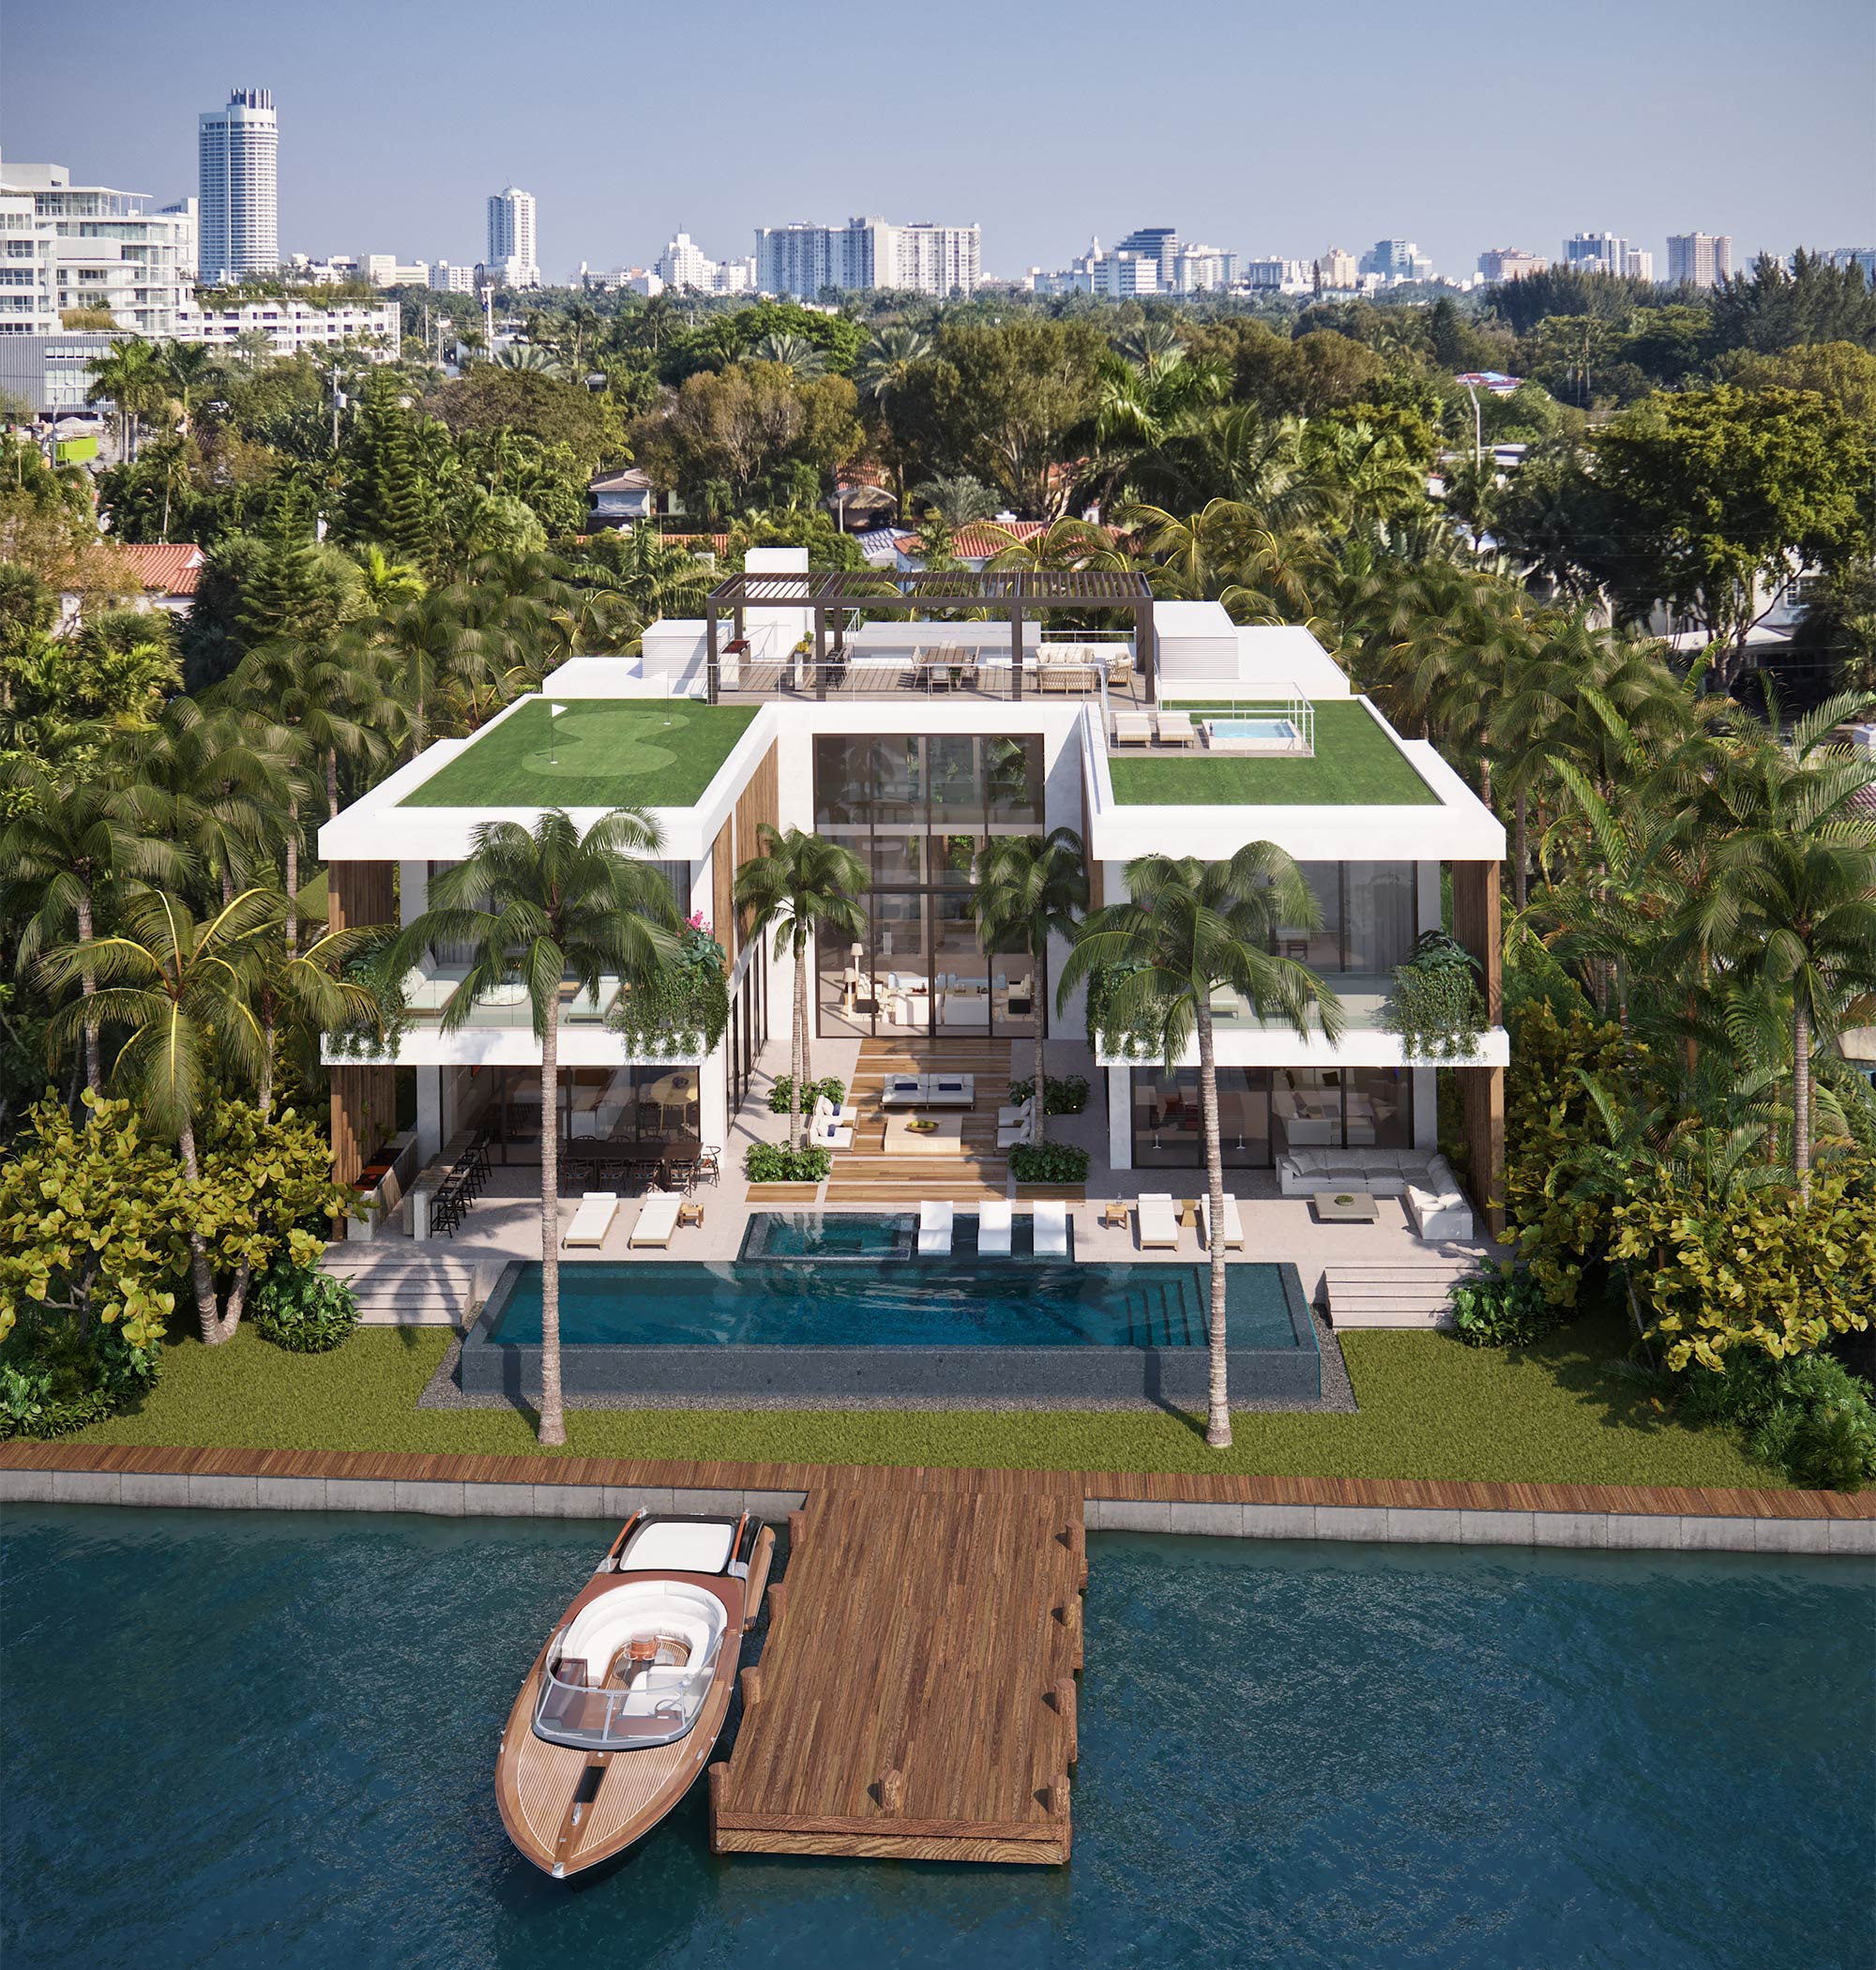 Architectural Rendering of an aerial view of the North Bay Road project located in Miami